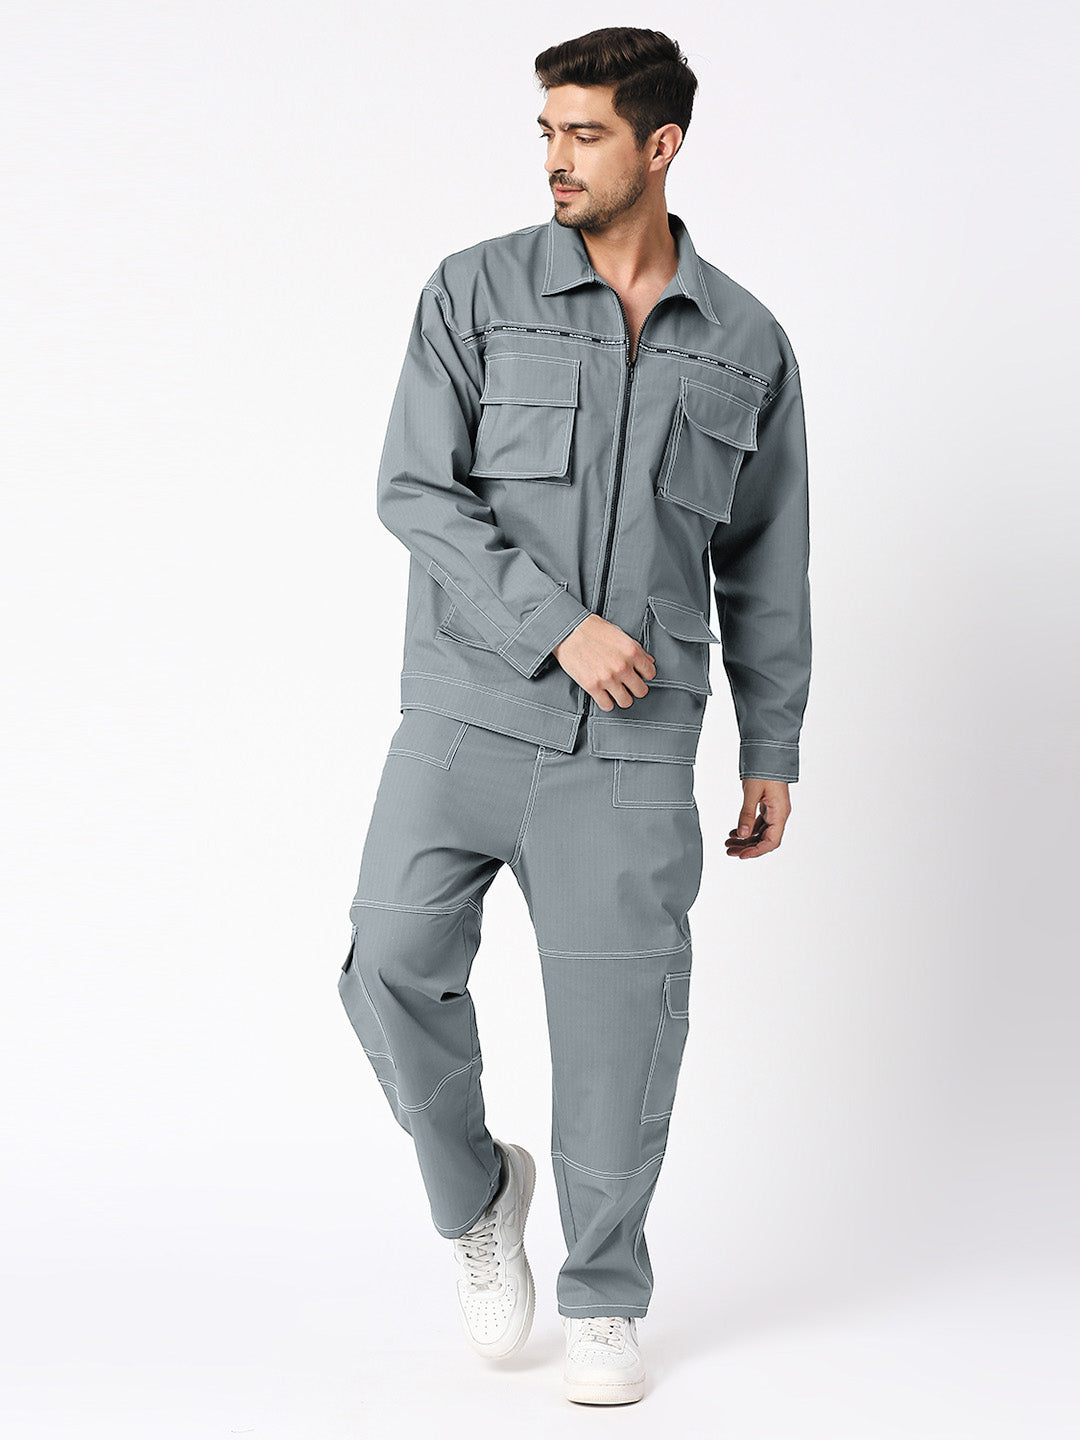 BLAMBLACK Men's Cargo Style Jacket With Pant Grey Color Co-Ord Set